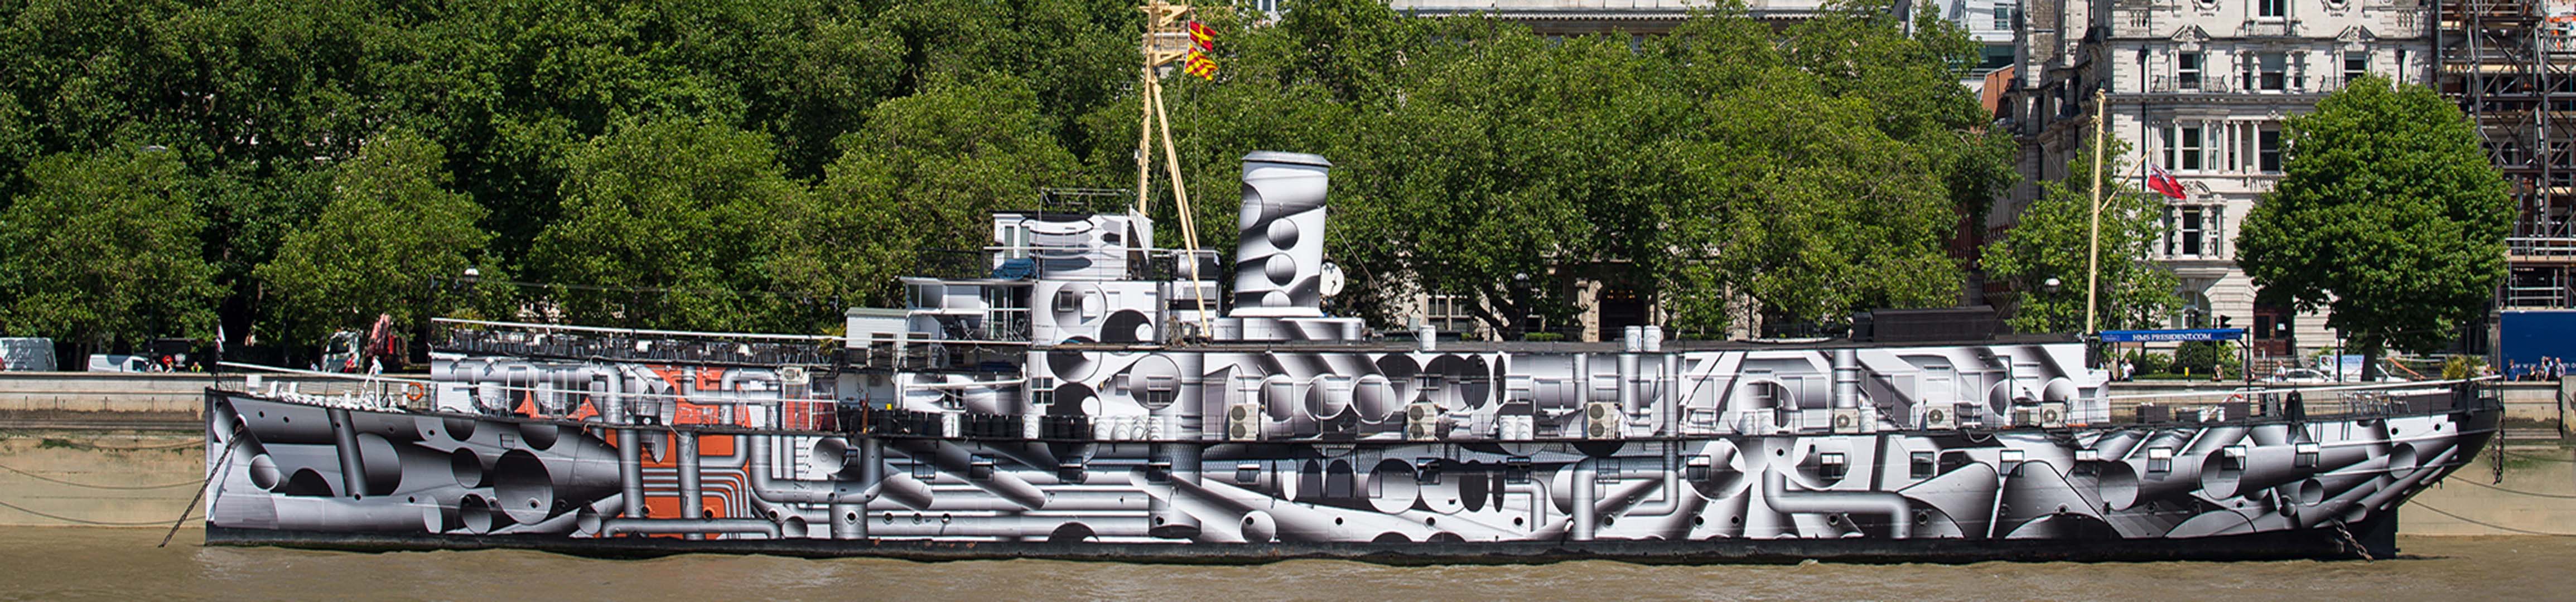 HMS President, London, originally built in 1918 as HMS Saxifrage, as part of the centennial commemorations the ship has been painted in a scheme inspired by wartime dazzle camouflage